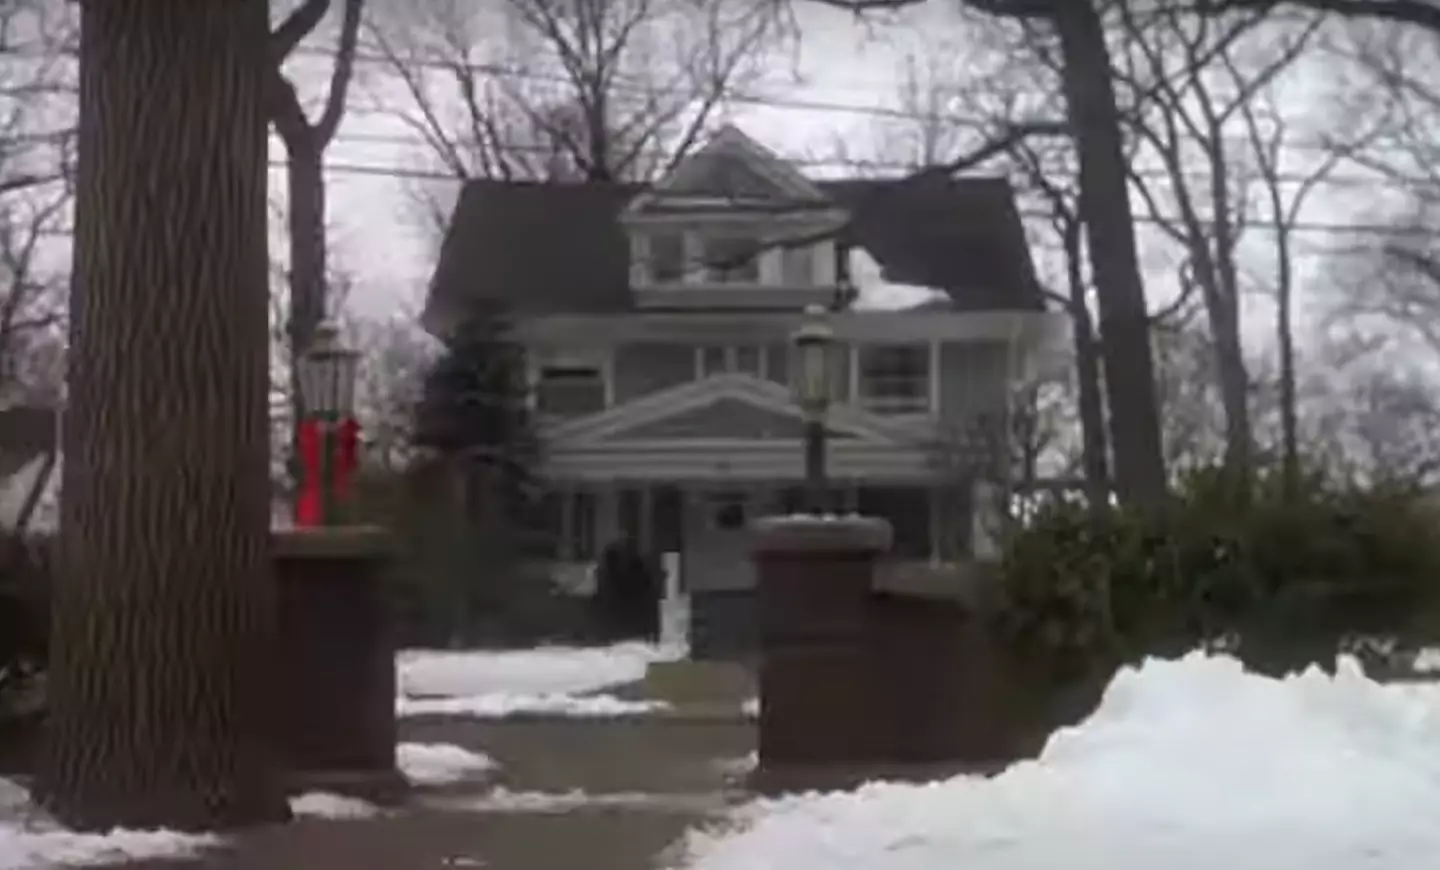 That wreath is on the house across the road from Kevin in Home Alone.